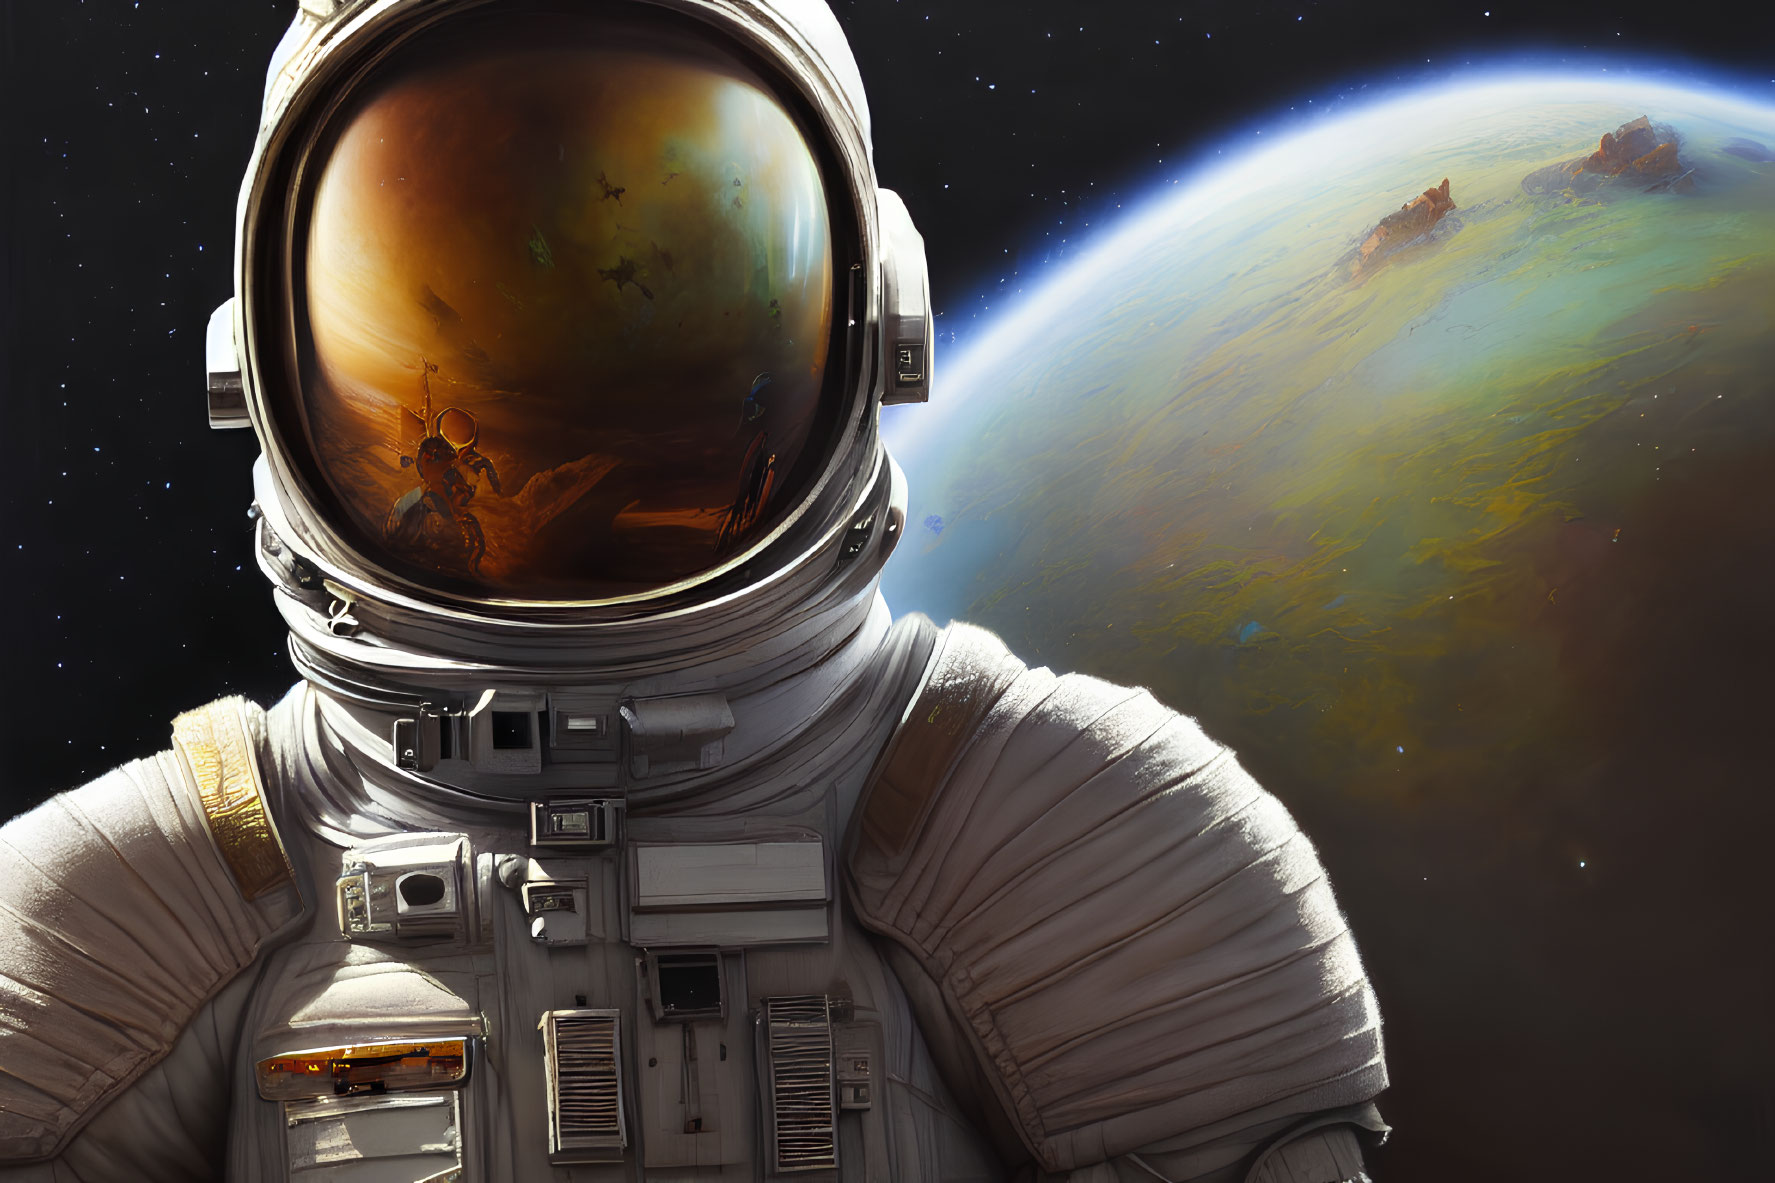 Astronaut in space suit with reflective visor and orange celestial body in space